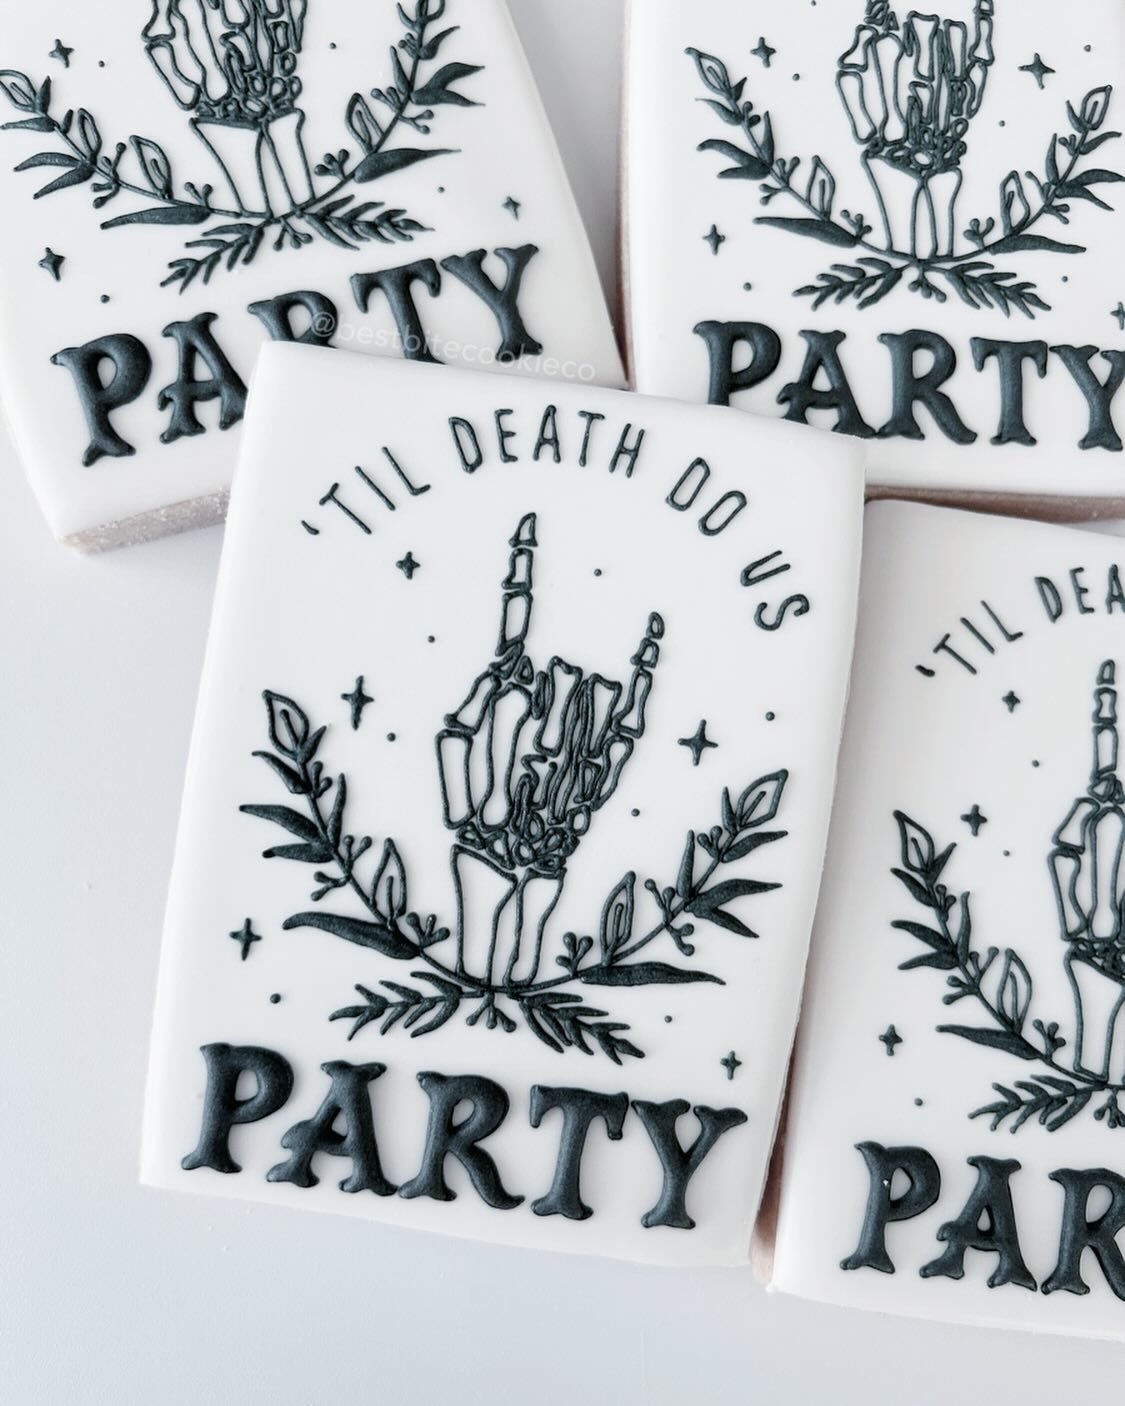 ✨Sneak peak✨

Can&rsquo;t wait to show the full set of this &lsquo;Til death do us Party theme! 💀💍
&bull;
&bull;
&bull;
#tildeathdousparty #tildeathdouspartybachelorette #tildeathdouspartycookies #bachelorettecookies #bachelorettethemes #bacheloret